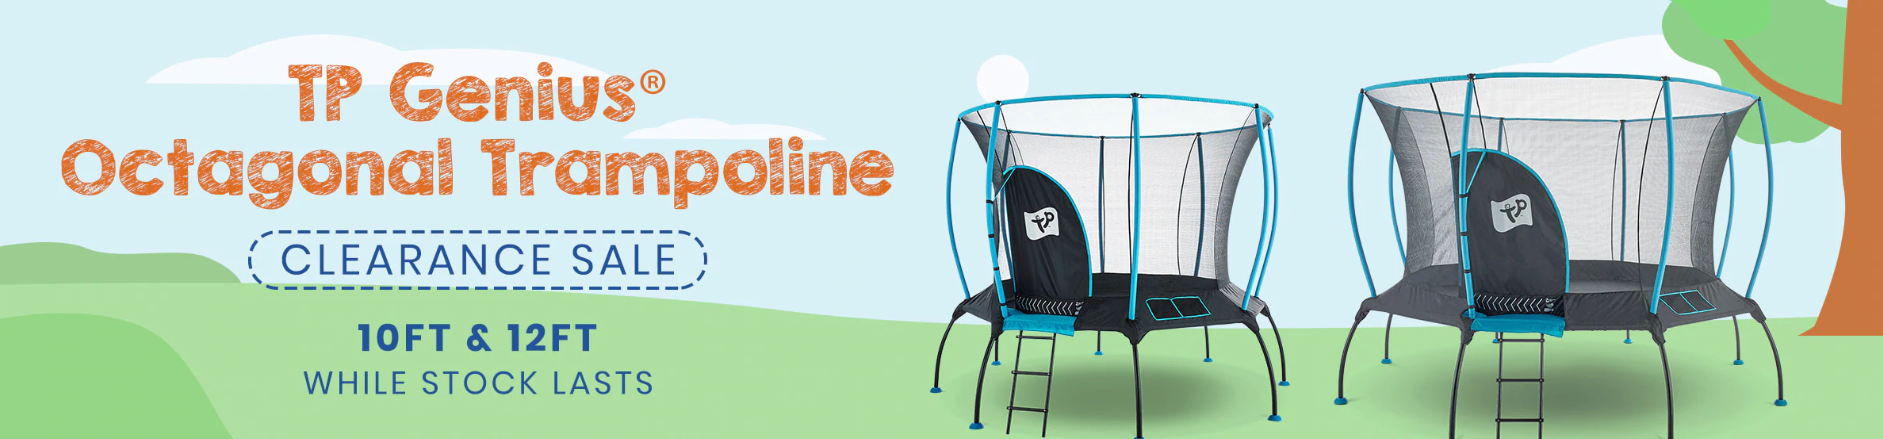 Up to 54% OFF RRP on Trampoline clearance sale at Lifespan Kids